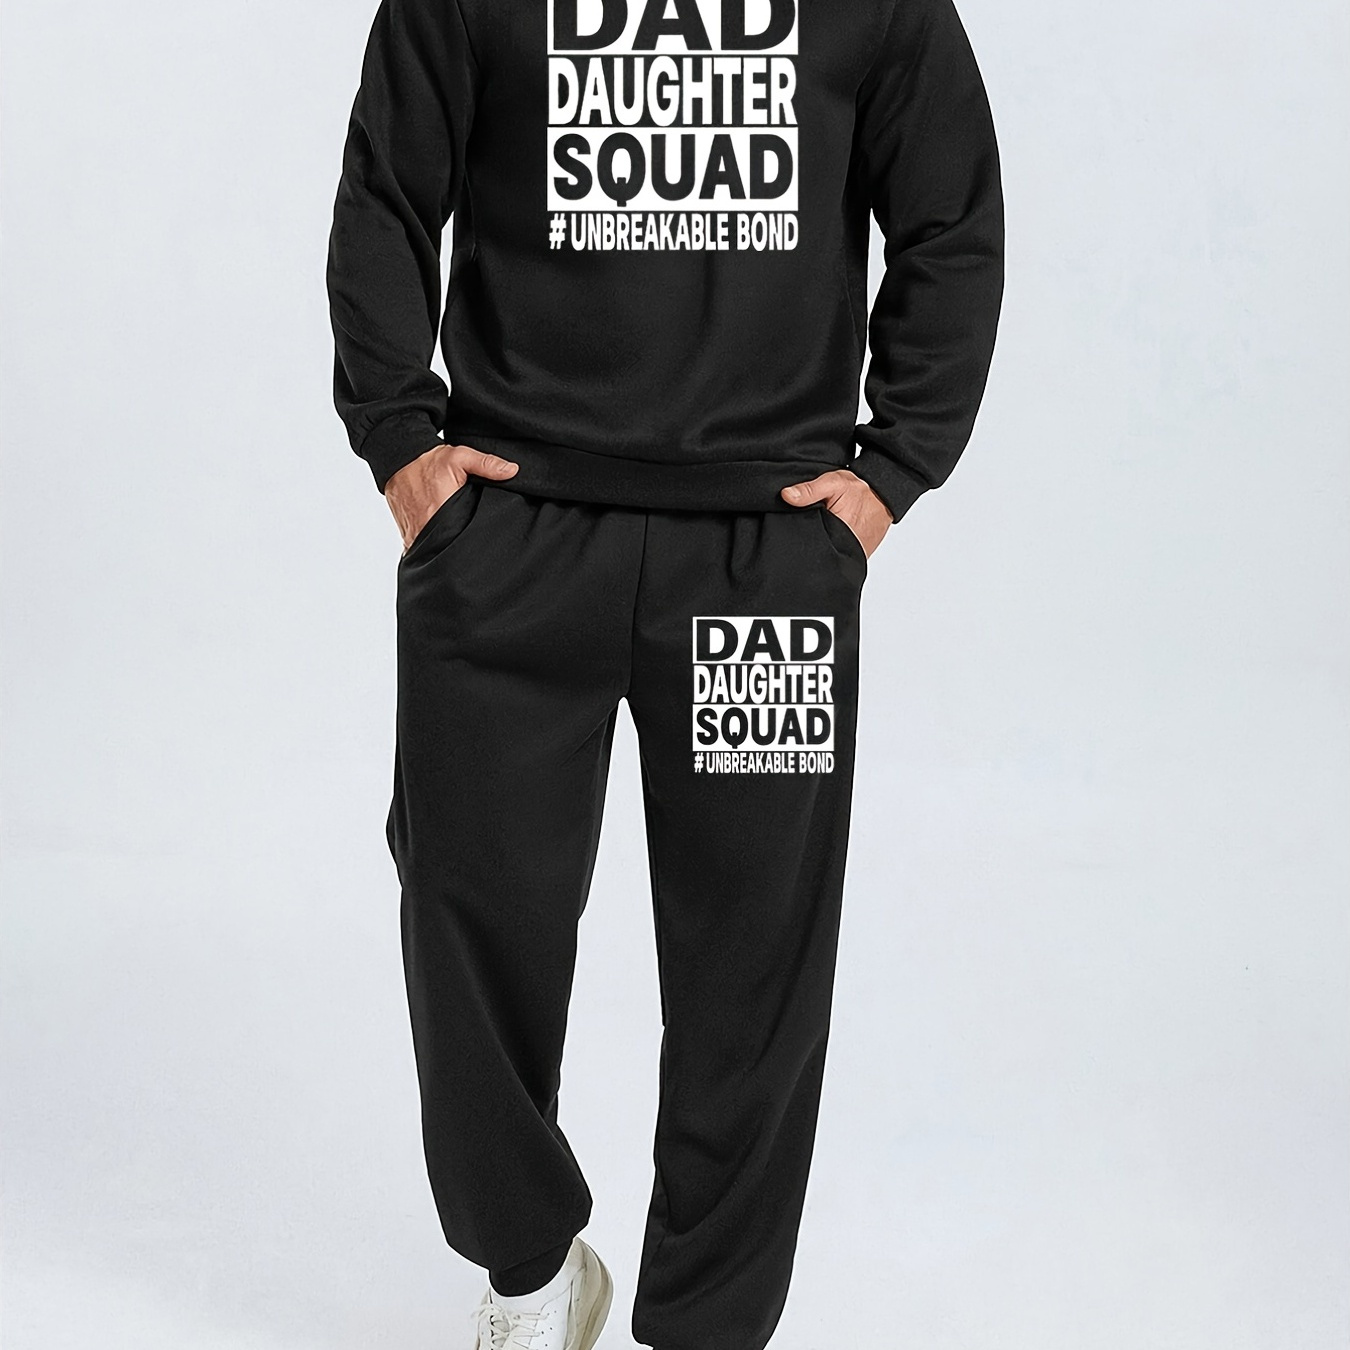 

Men's Creative Slogan Graphic Print Round Neck Casual Outfit Set, 2 Pieces Long Sleeve Pullover Sweatshirt And Drawstring Sweatpants